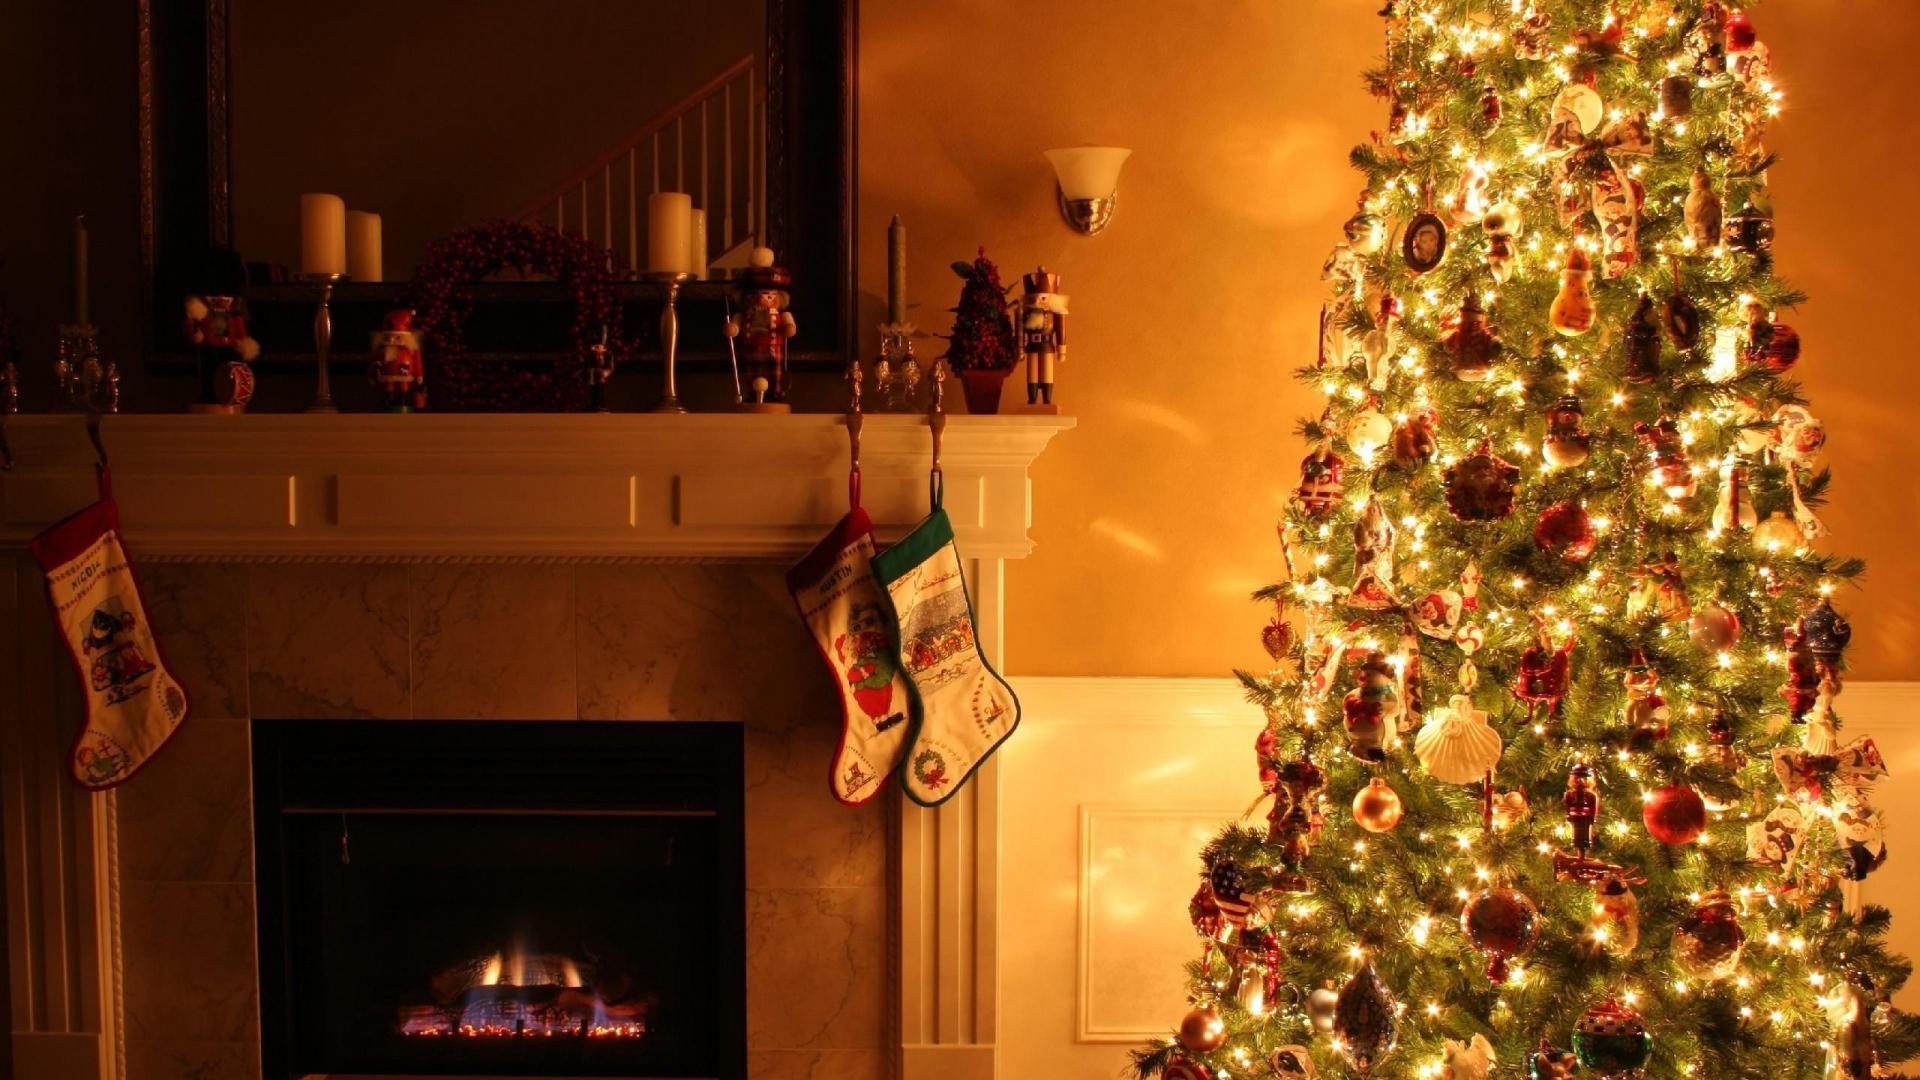 Download Wallpaper 1920x1080 christmas tree, fireplace